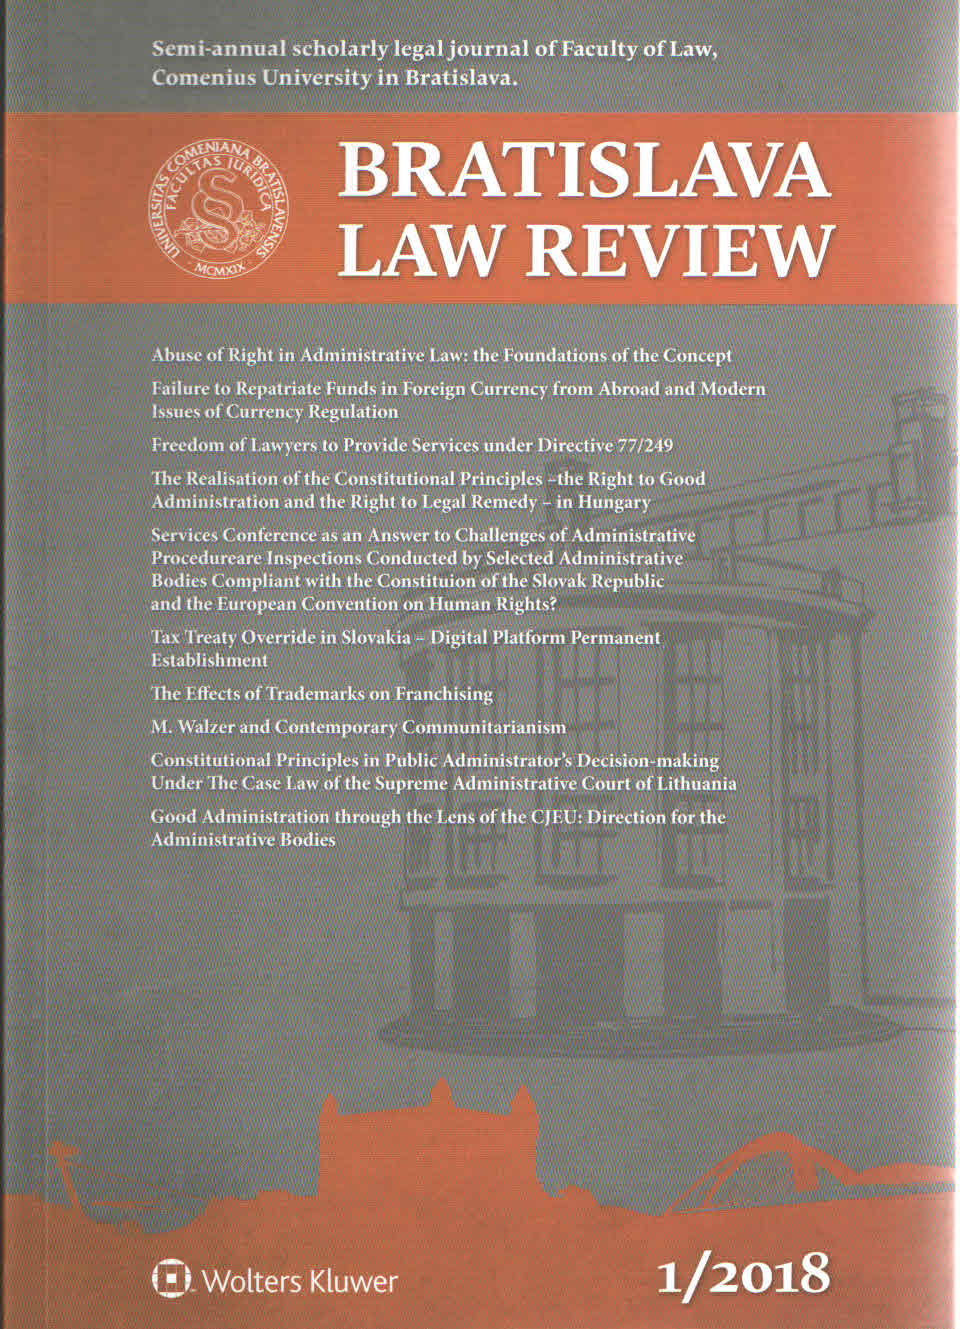 CONSTITUTIONAL PRINCIPLES IN PUBLIC ADMINISTRATOR’S DECISION-MAKING UNDER THE CASE LAW OF THE SUPREME ADMINISTRATIVE COURT OF LITHUANIA